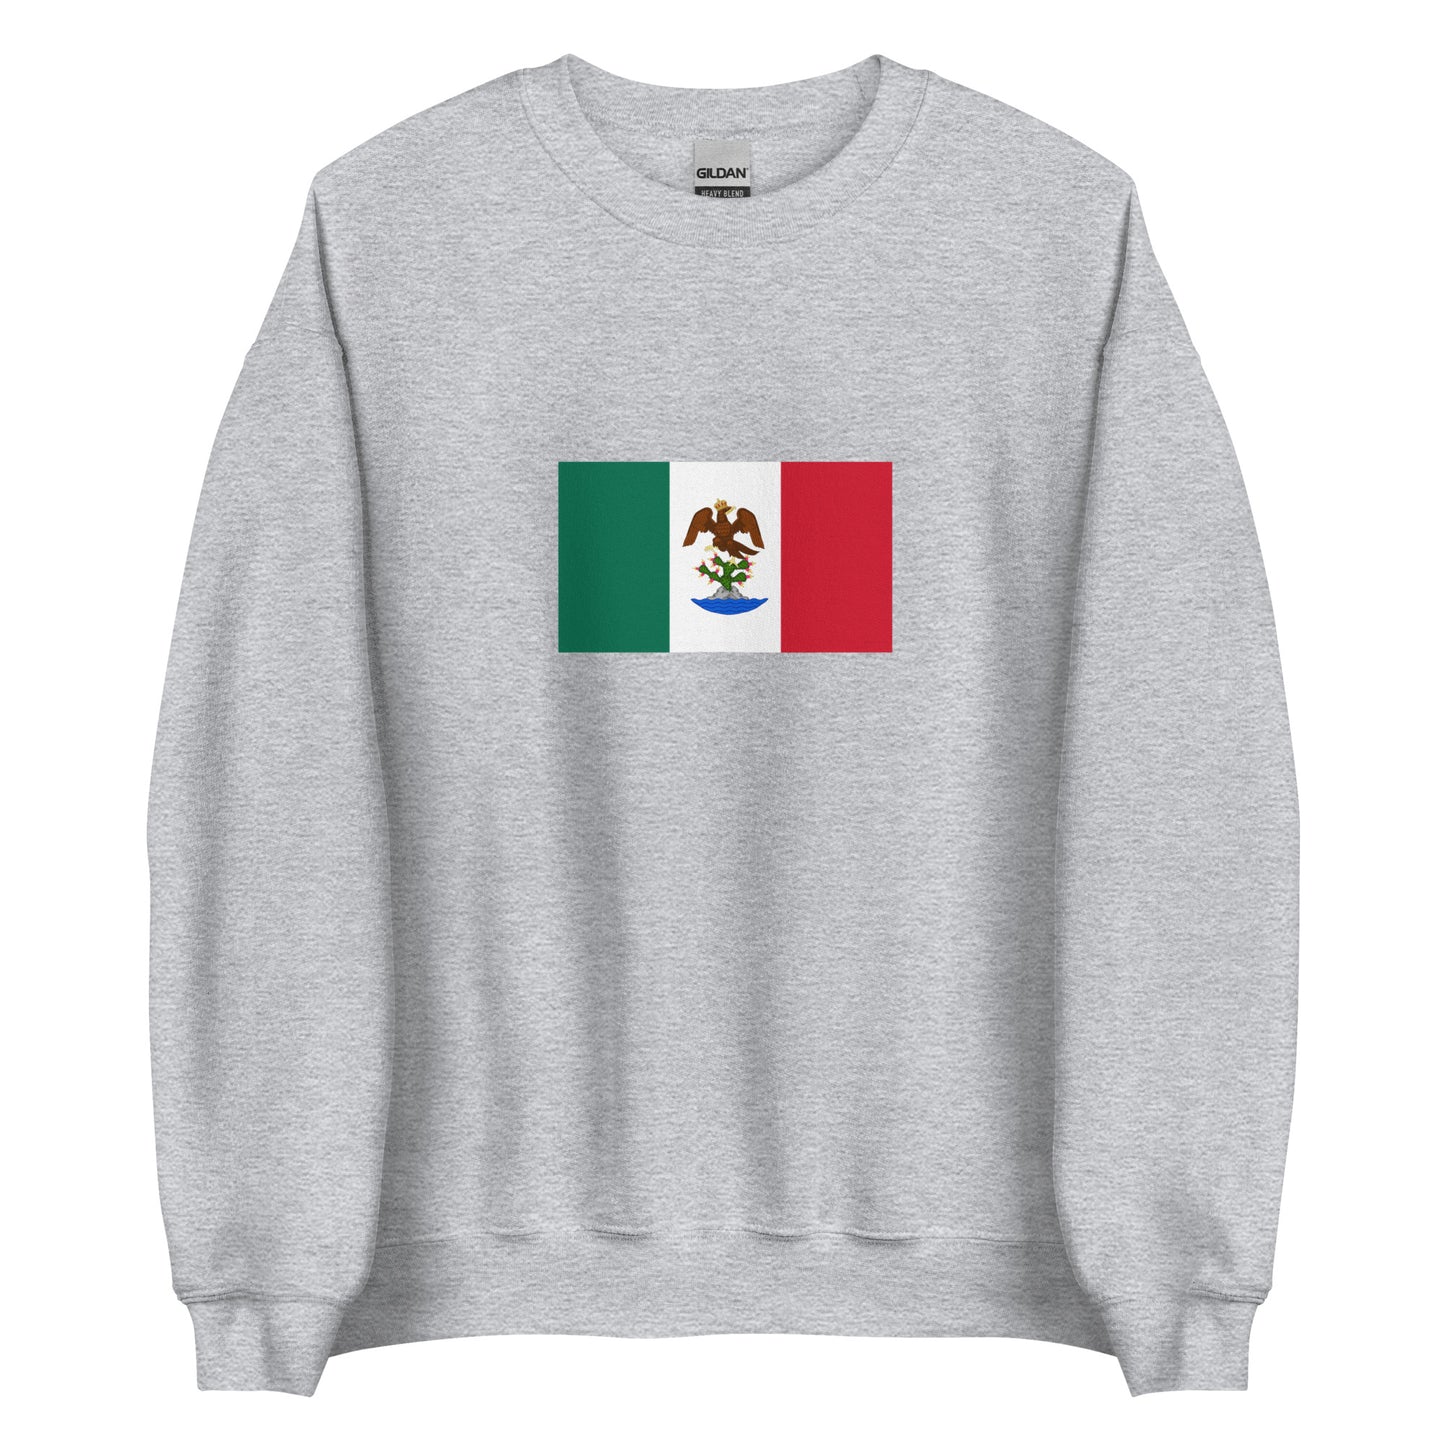 First Mexican Empire (1821-1823) | Mexico Flag Interactive History Sweatshirt